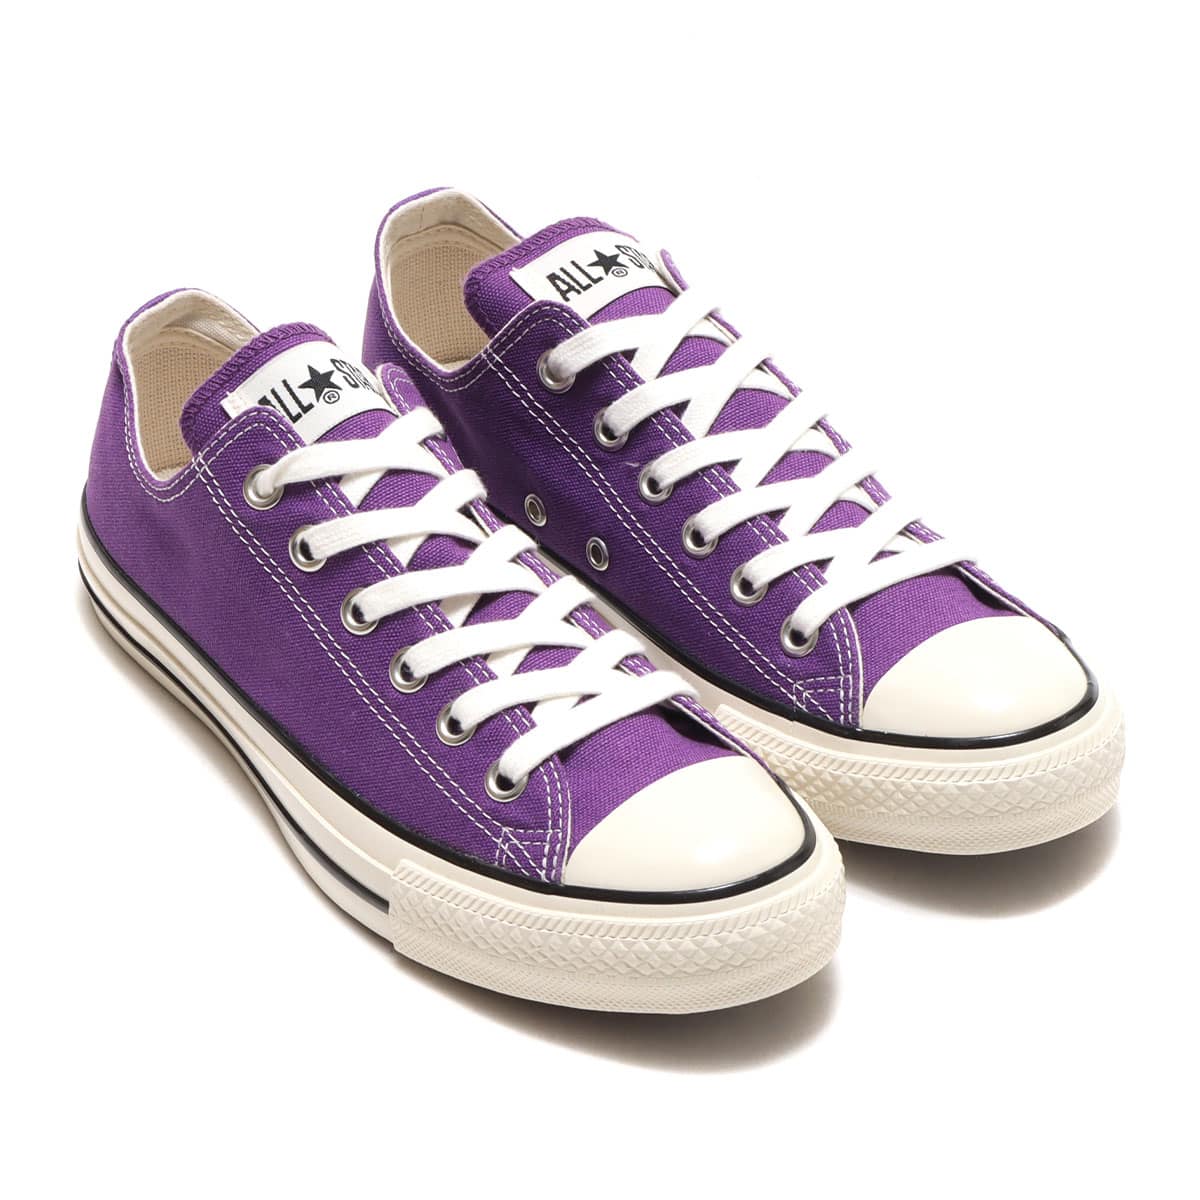 CONVERSE ALL STAR US COLORS OX PURPLE 22FW-I_photo_large